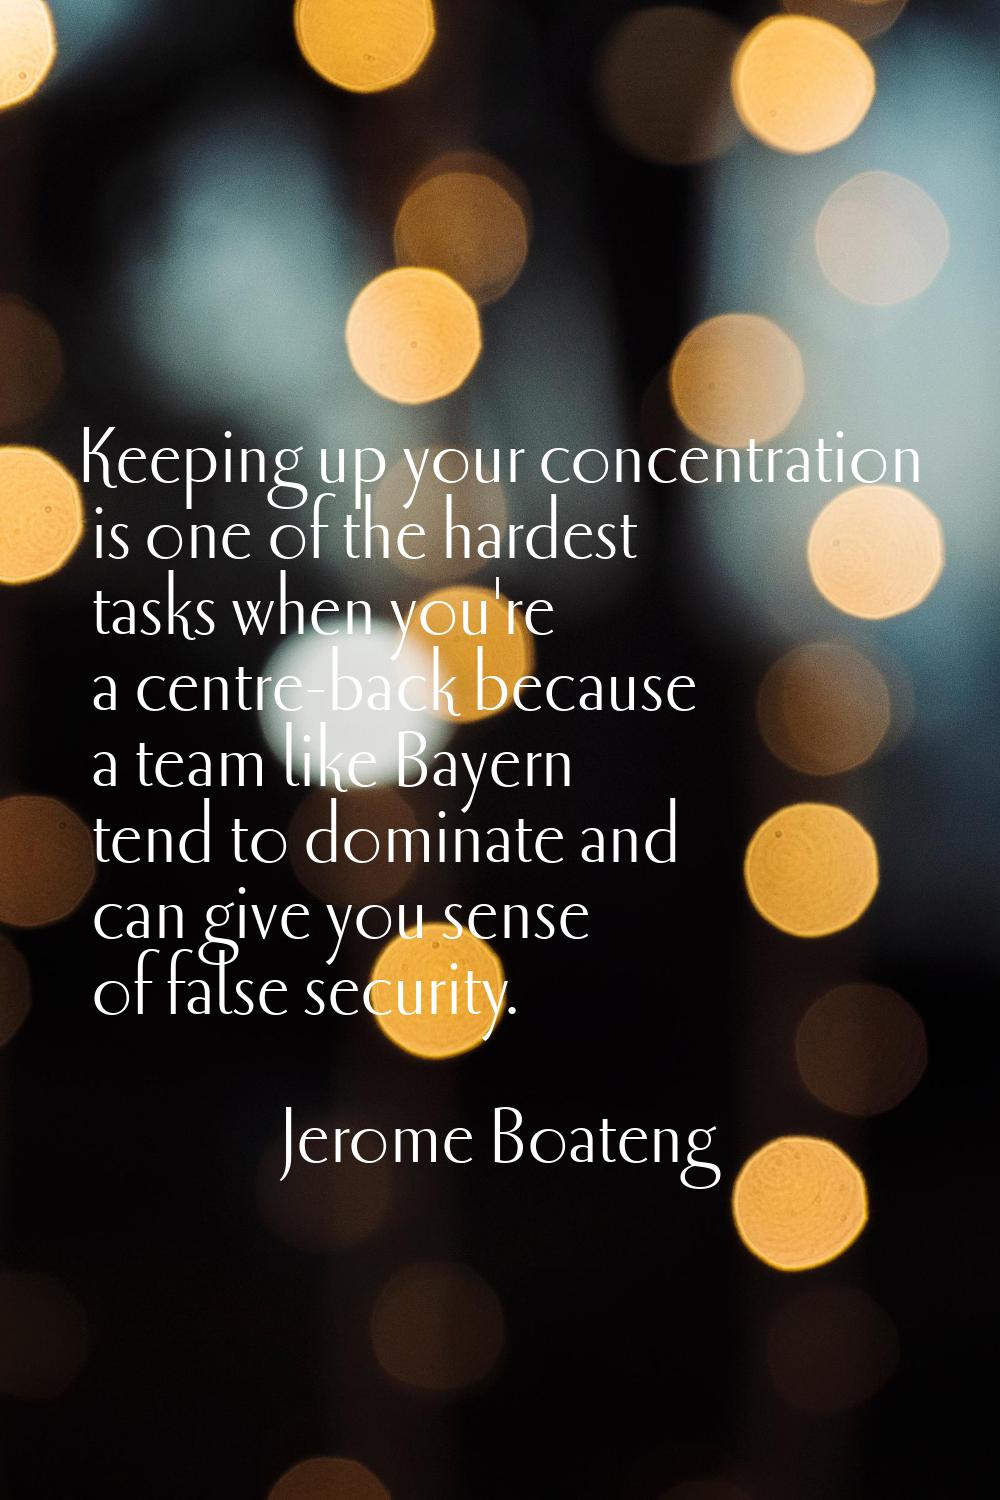 Keeping up your concentration is one of the hardest tasks when you're a centre-back because a team 